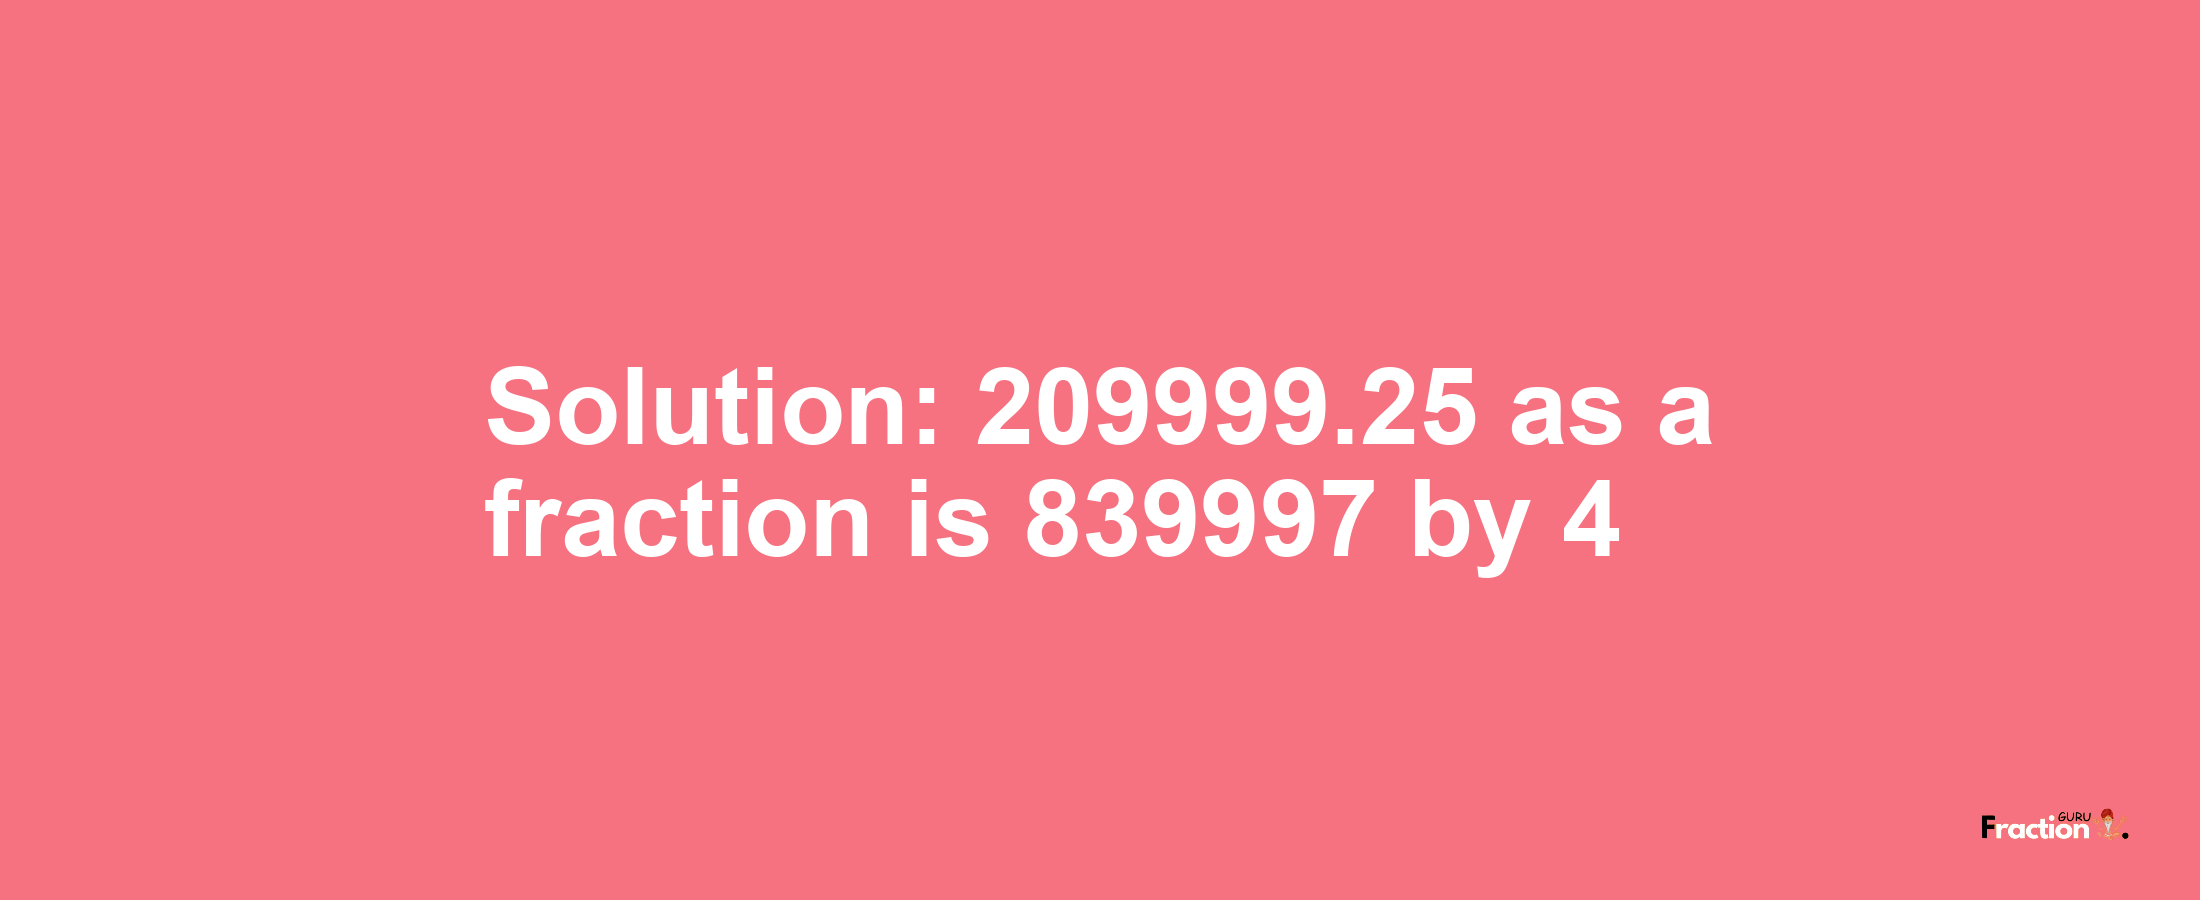 Solution:209999.25 as a fraction is 839997/4